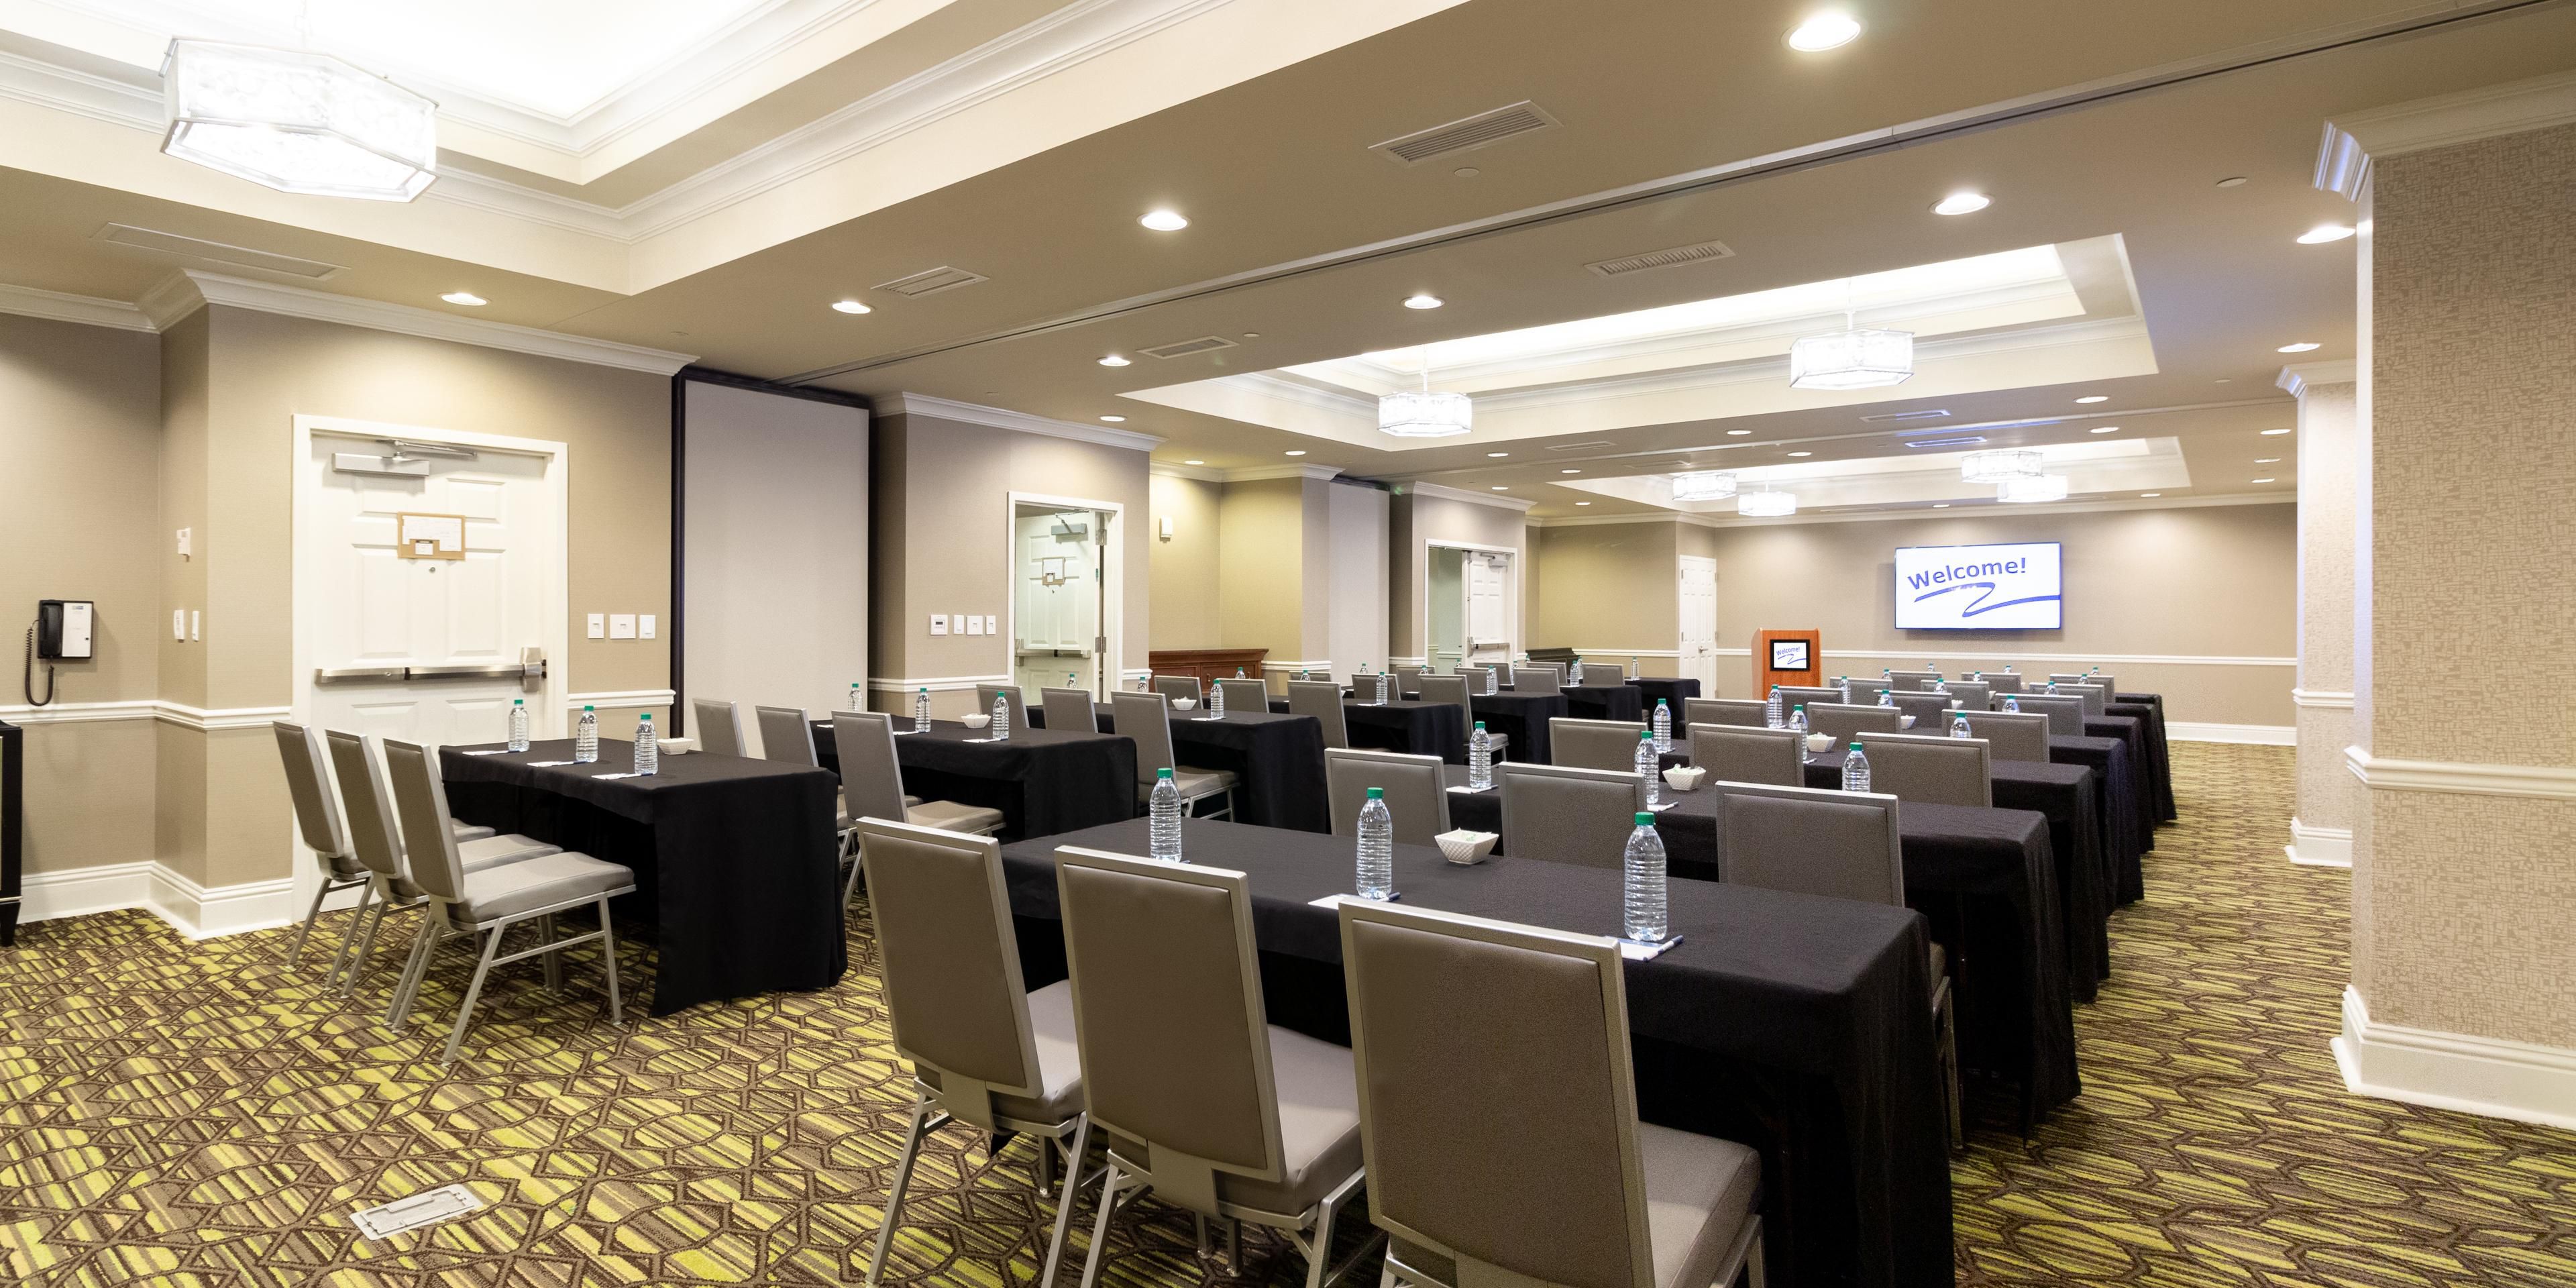 Find your space with us! Our property features several meeting and event spaces. We make planning easy so you can focus your time on making your meeting a success.